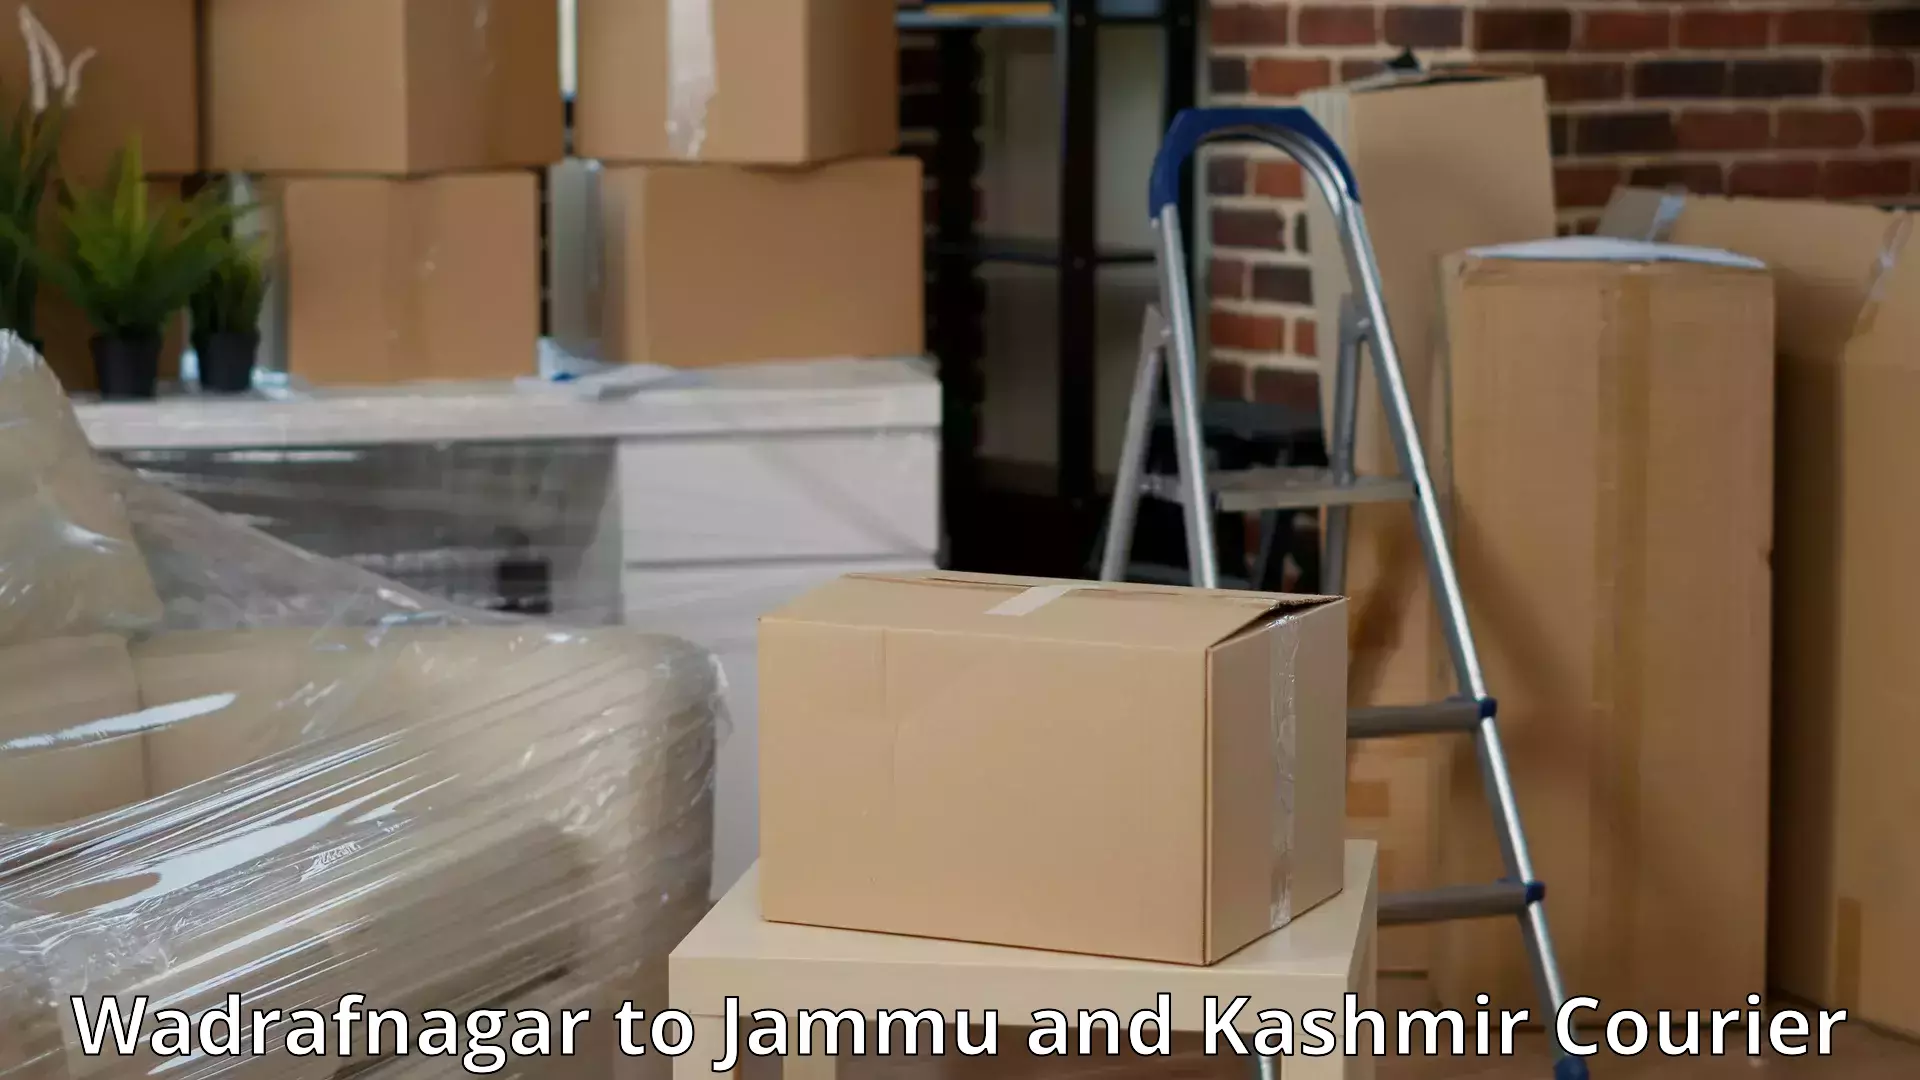 Dependable moving services in Wadrafnagar to Shopian